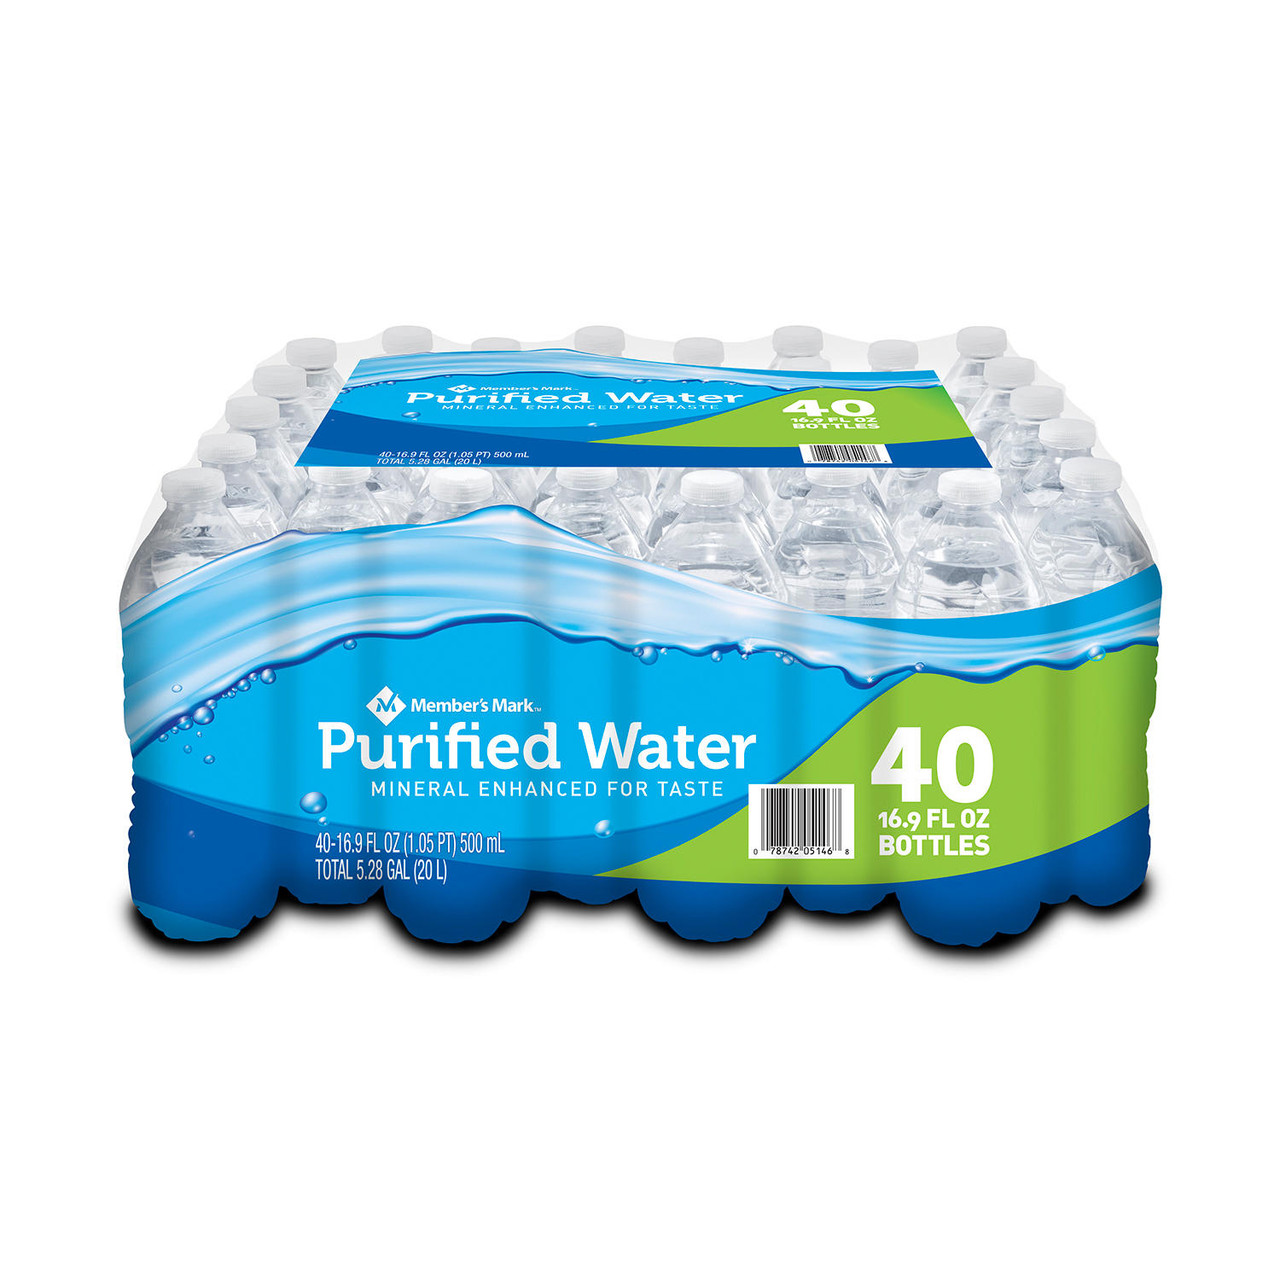 Member's Mark Purified Water (16.9oz / 40pk) - [From 49.00 - Choose pk Qty ] - *Ships from Miami